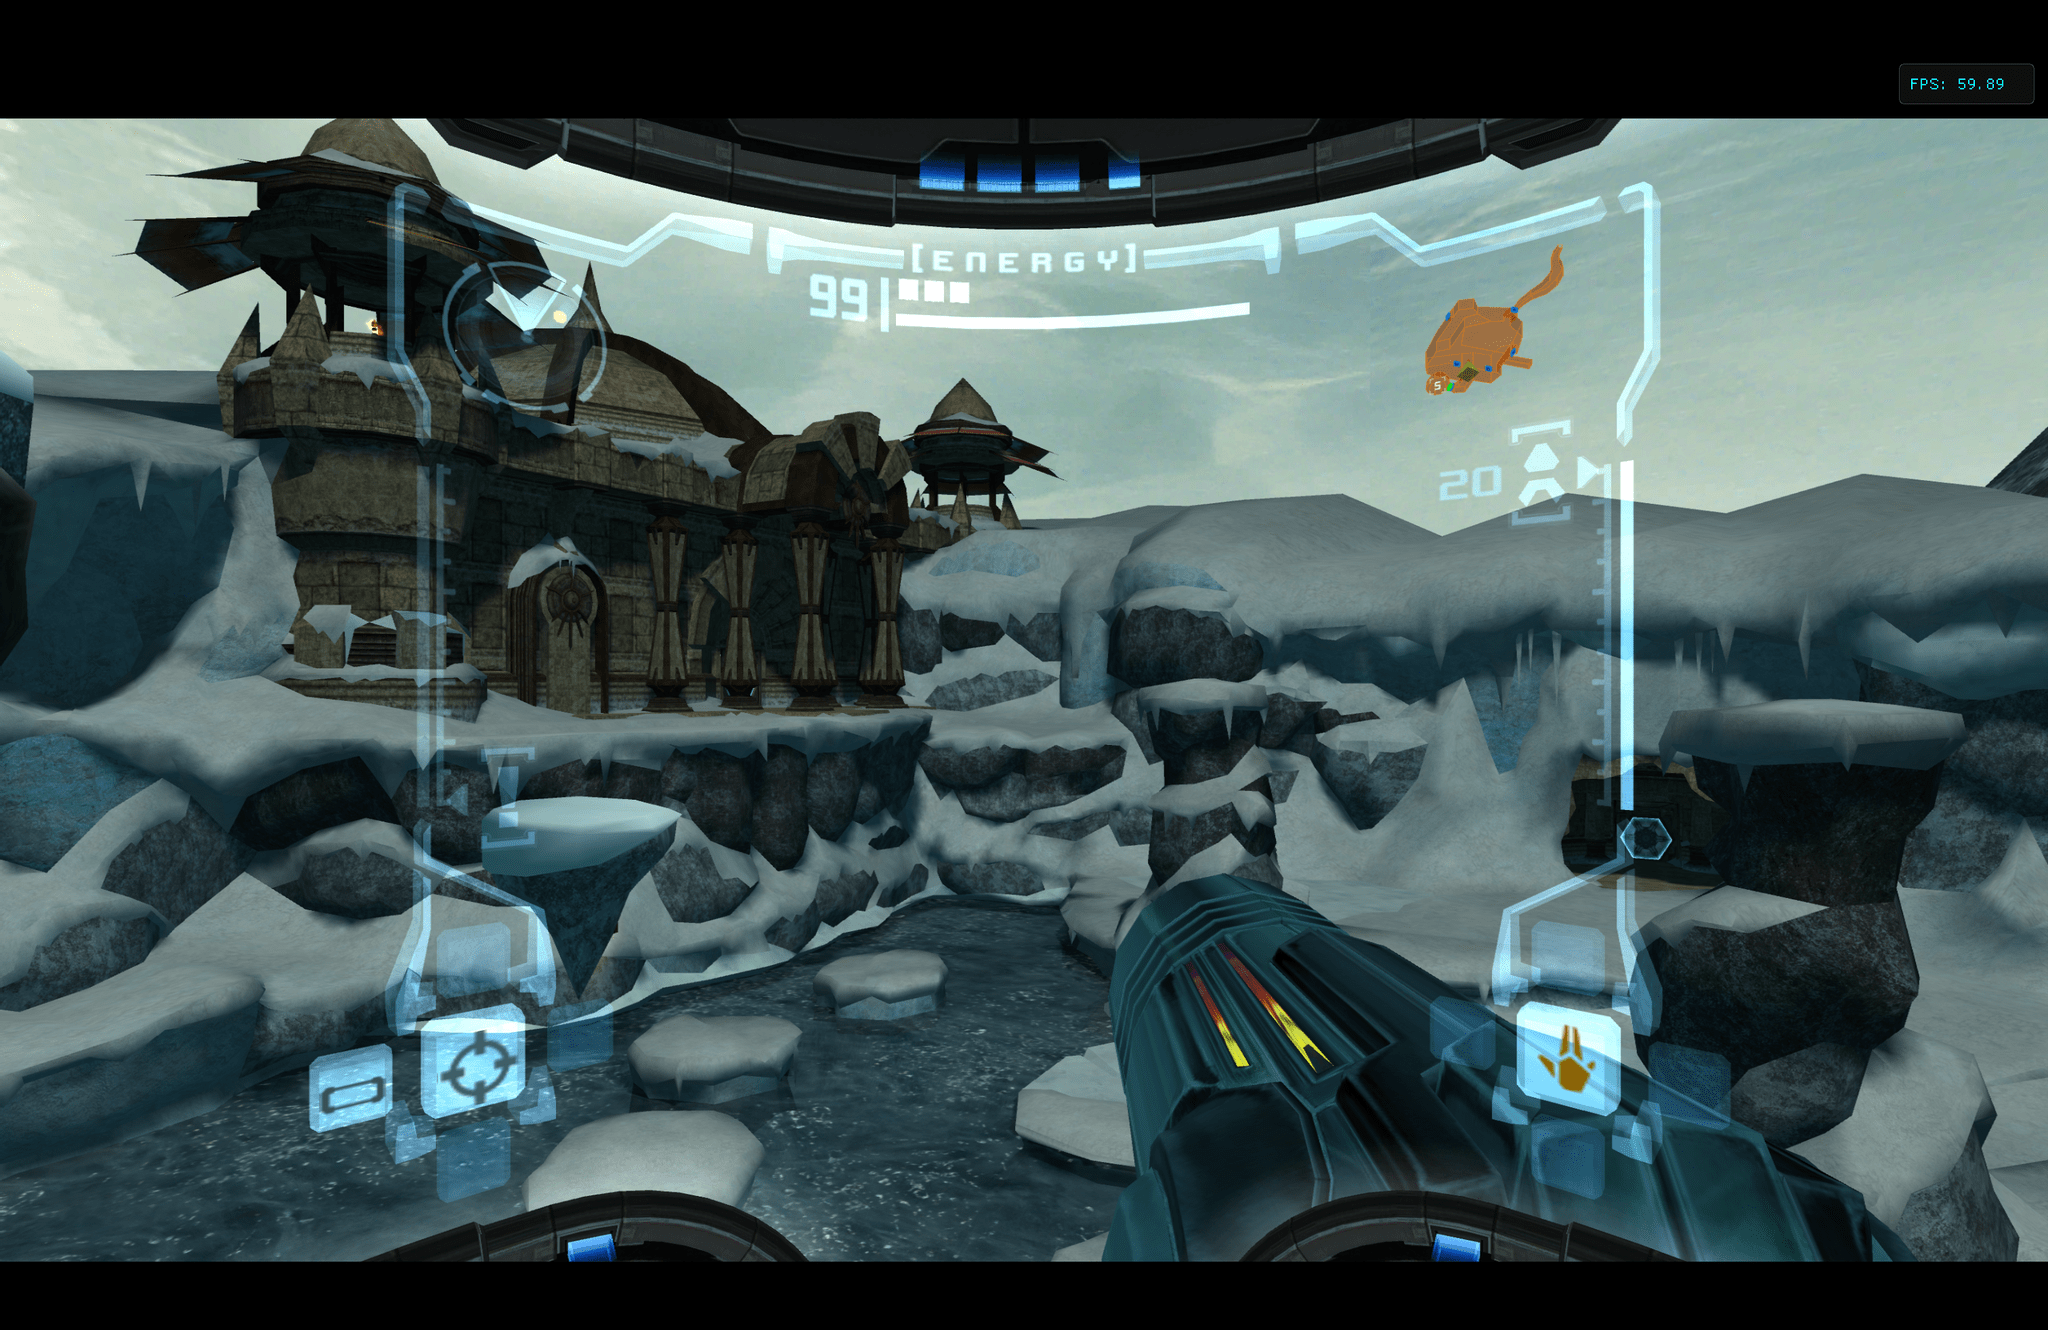 Metroid Prime, rendered at glorious 5K with a custom HD texture pack, running at 60fps on the M1 Max MacBook Pro via Dolphin.